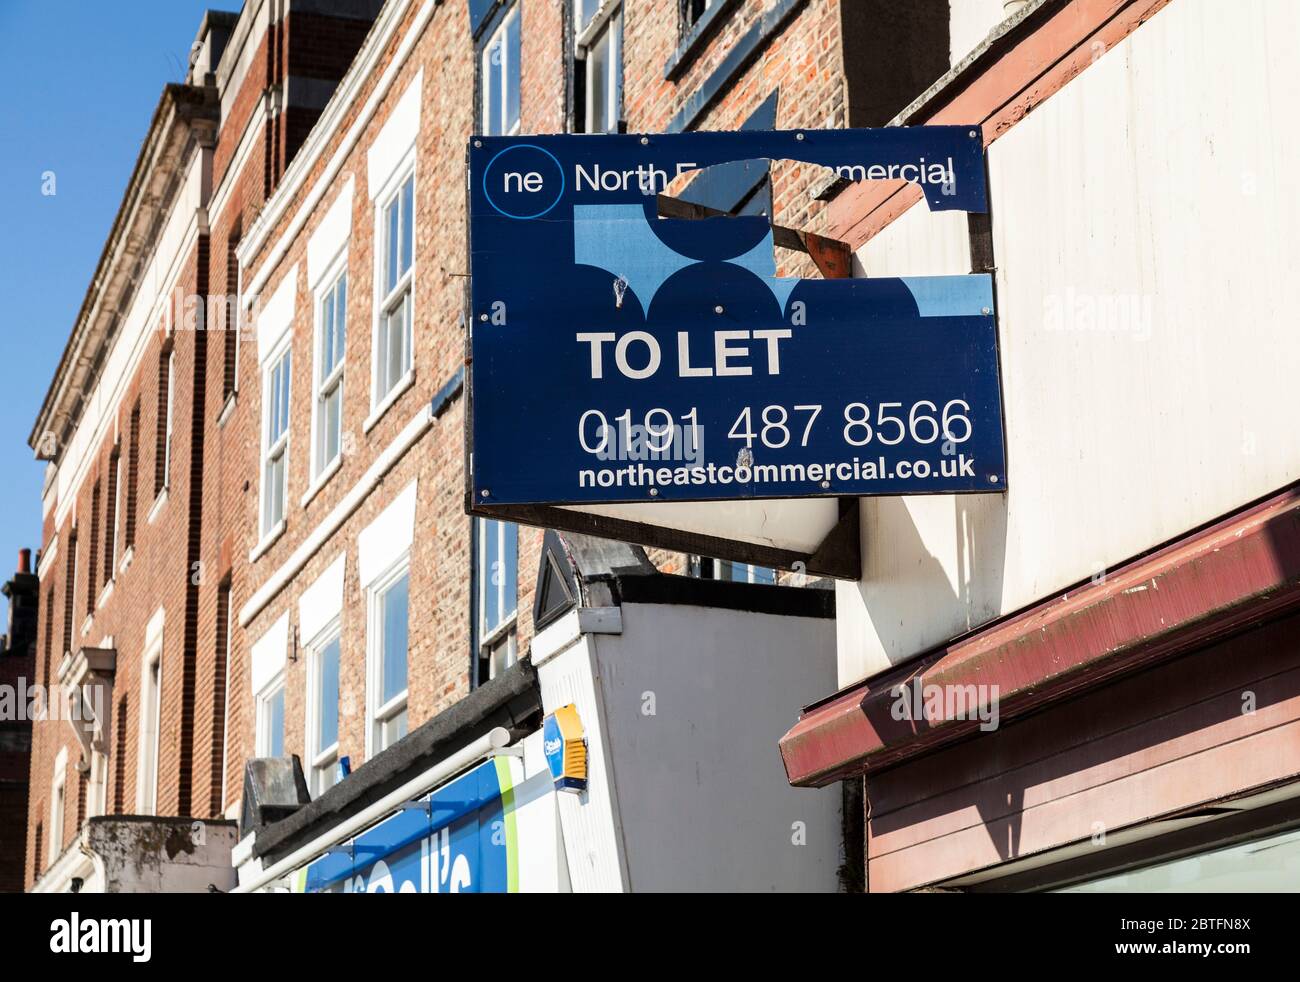 The empty shops on the West side of the High Street in Stockton on Tees,England,UK. To Let sign in close up Stock Photo